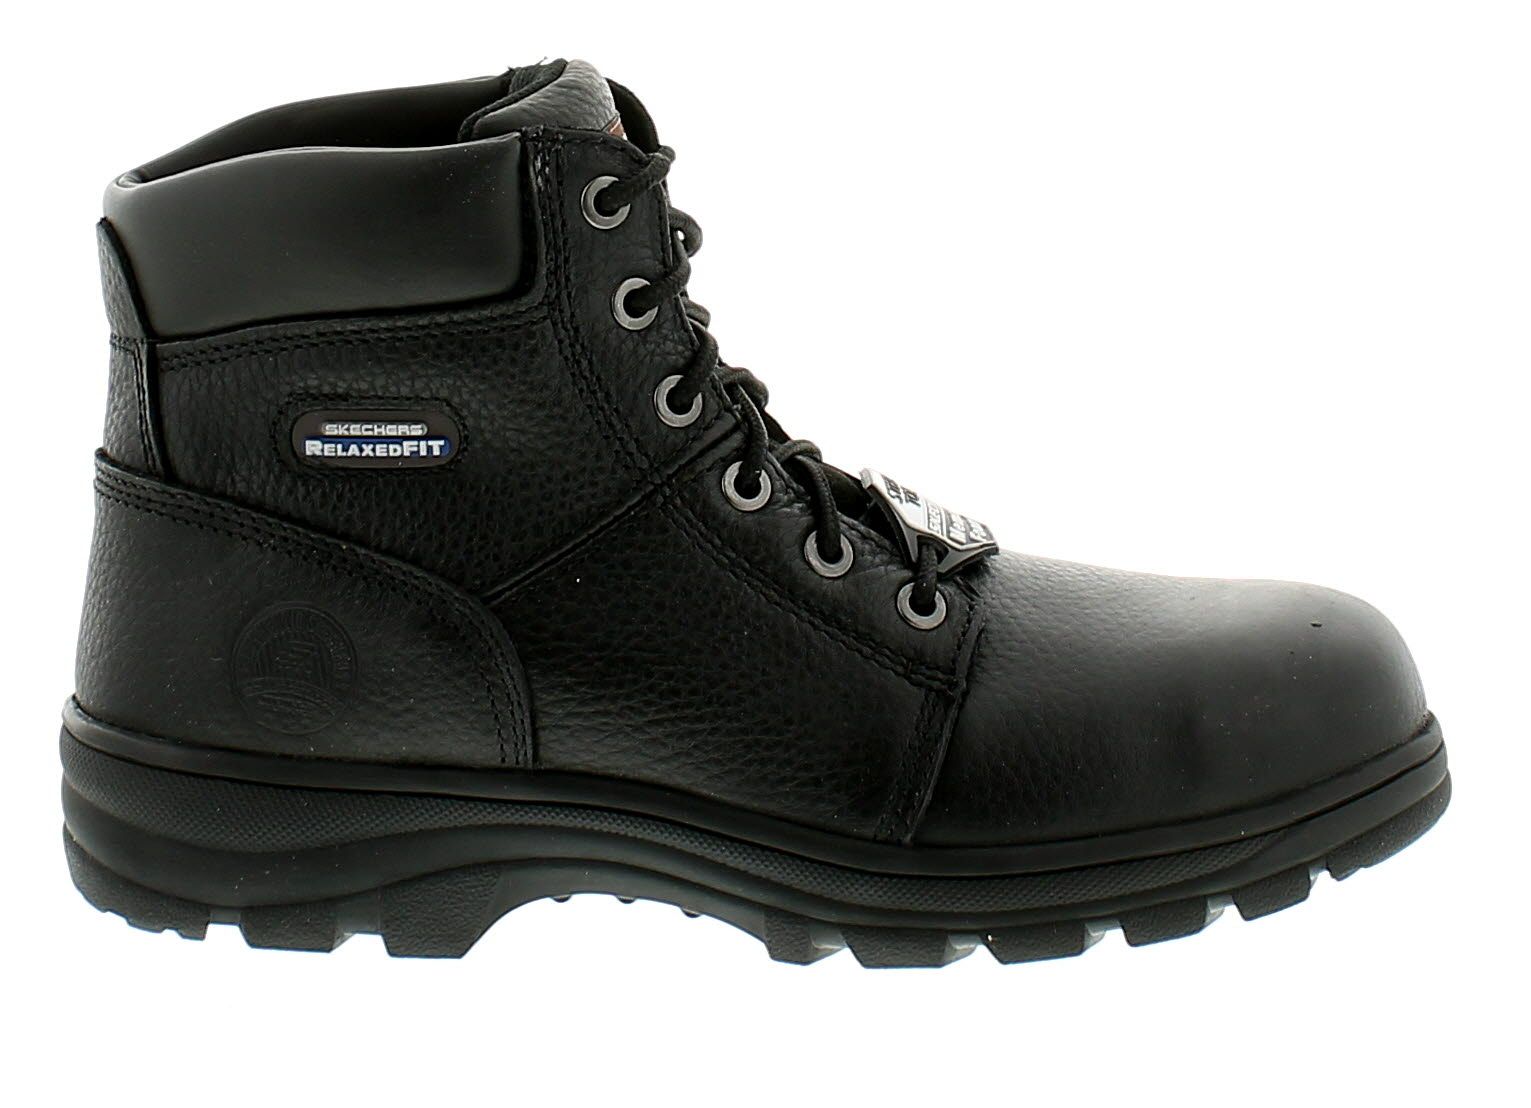 <Ul><Li>Skechers Workshire Men'S Boots In Black</Li><Li>Smooth Full Grain Leather Upper In A Lace Up Steel Safety Toe Ankle Boot With Stitching And Overlay Accents. Oil Resistant Traction Rubber Outsole. Memory Foam Insole. Ec Specific Edition. Steel Safety Toe Tested Astm F2413-2011 I/75 C/75 Protection, Electrical Hazard (Eh) Safe Design Tested Astm F2413-05. Memory Foam Cushioned Removable Comfort Insole, Shock Absorbing Supportive Lightweight Midso</Li><Li>Leather Upper</Li><Li>Fabric Lining</Li><Li>Synthetic Sole</Li><Li>Mens Gentlemans Workwear Safety Tie Up Protective Boots</Li>